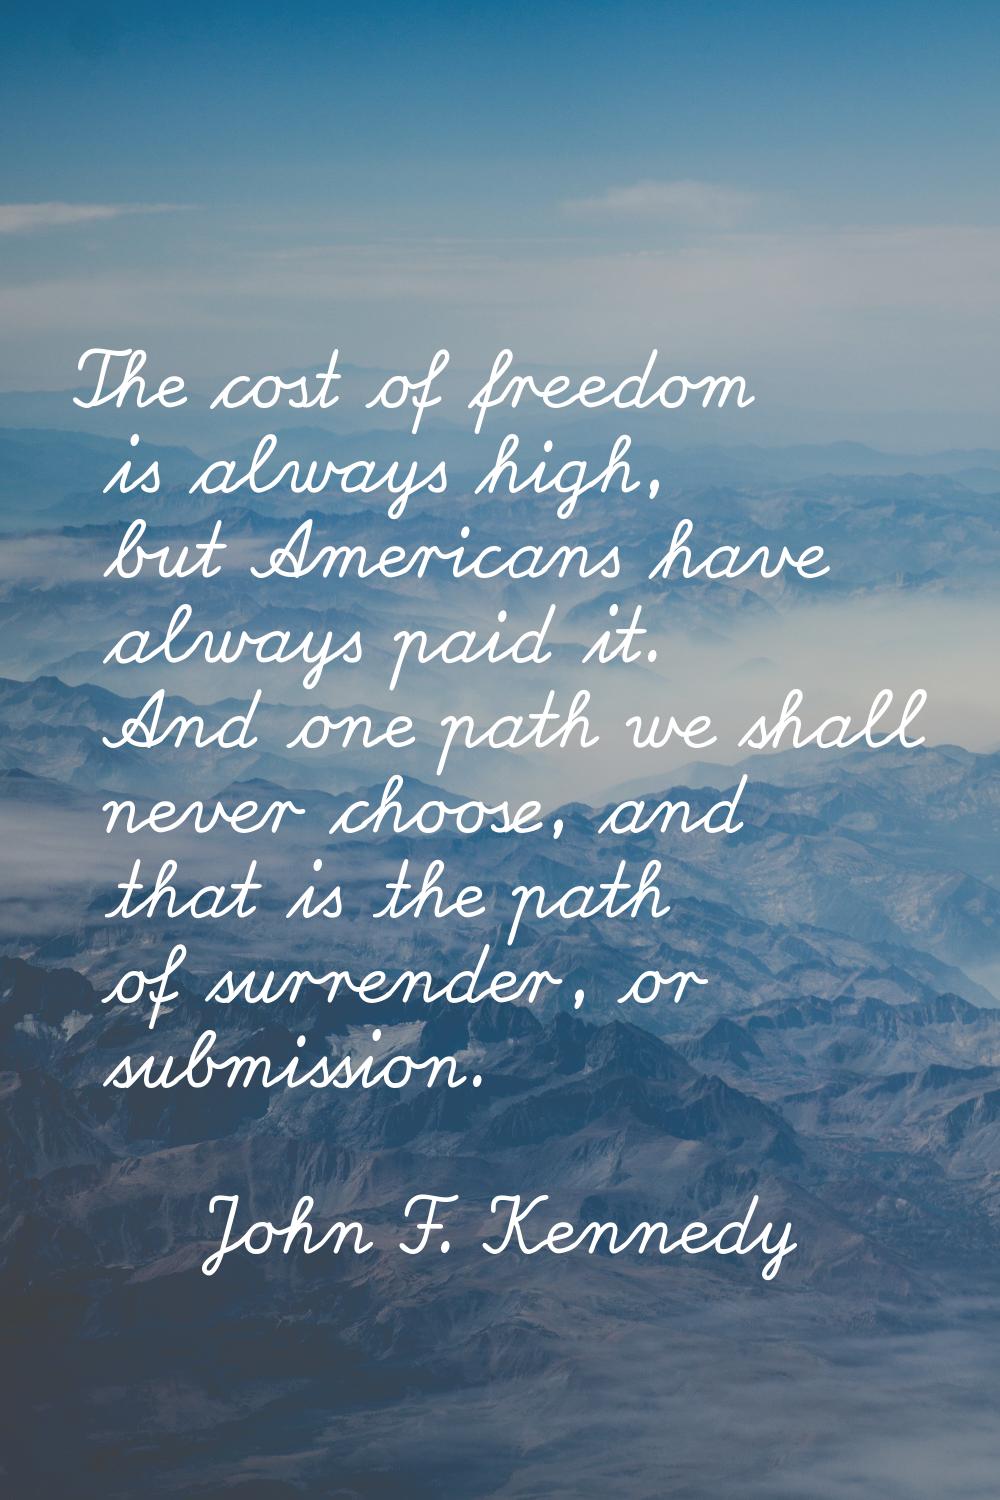 The cost of freedom is always high, but Americans have always paid it. And one path we shall never 